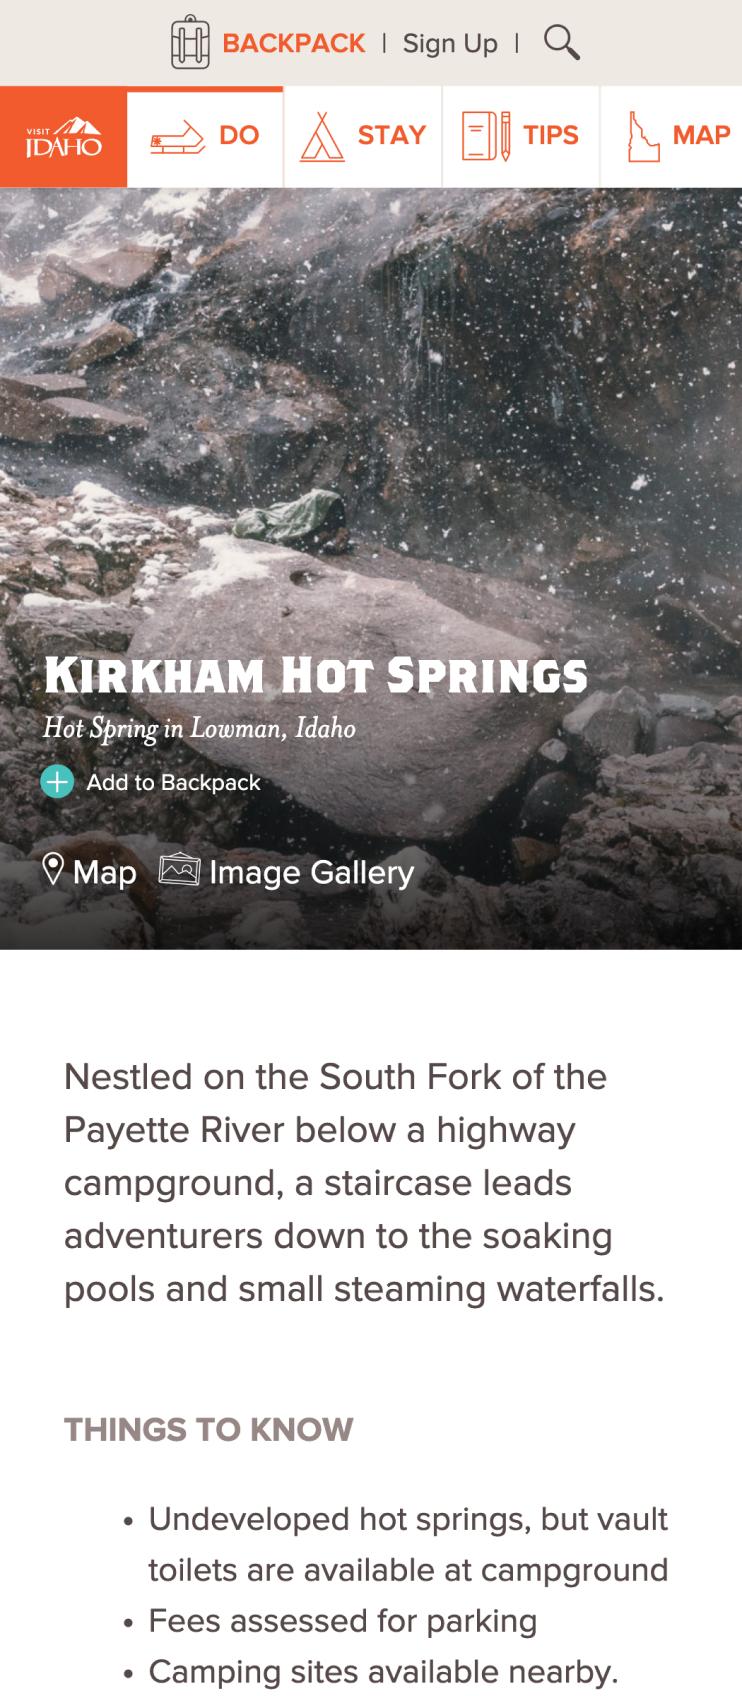 Mobile size webpage showing an overview of Kirkham Hot Springs with details